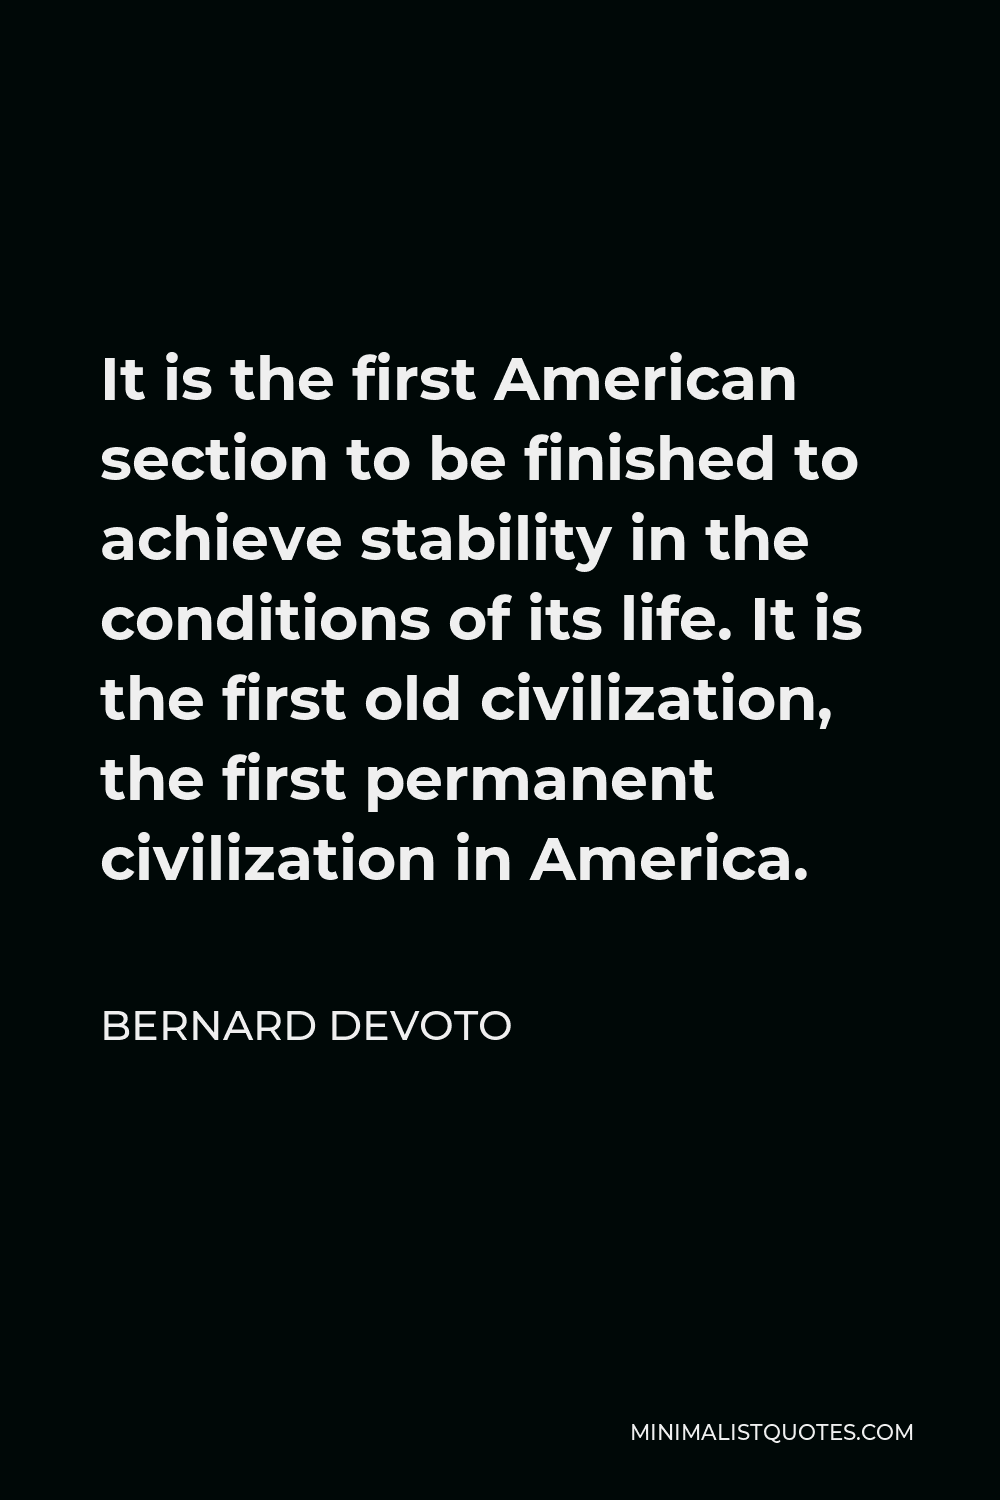 Bernard DeVoto Quote - It is the first American section to be finished to achieve stability in the conditions of its life. It is the first old civilization, the first permanent civilization in America.